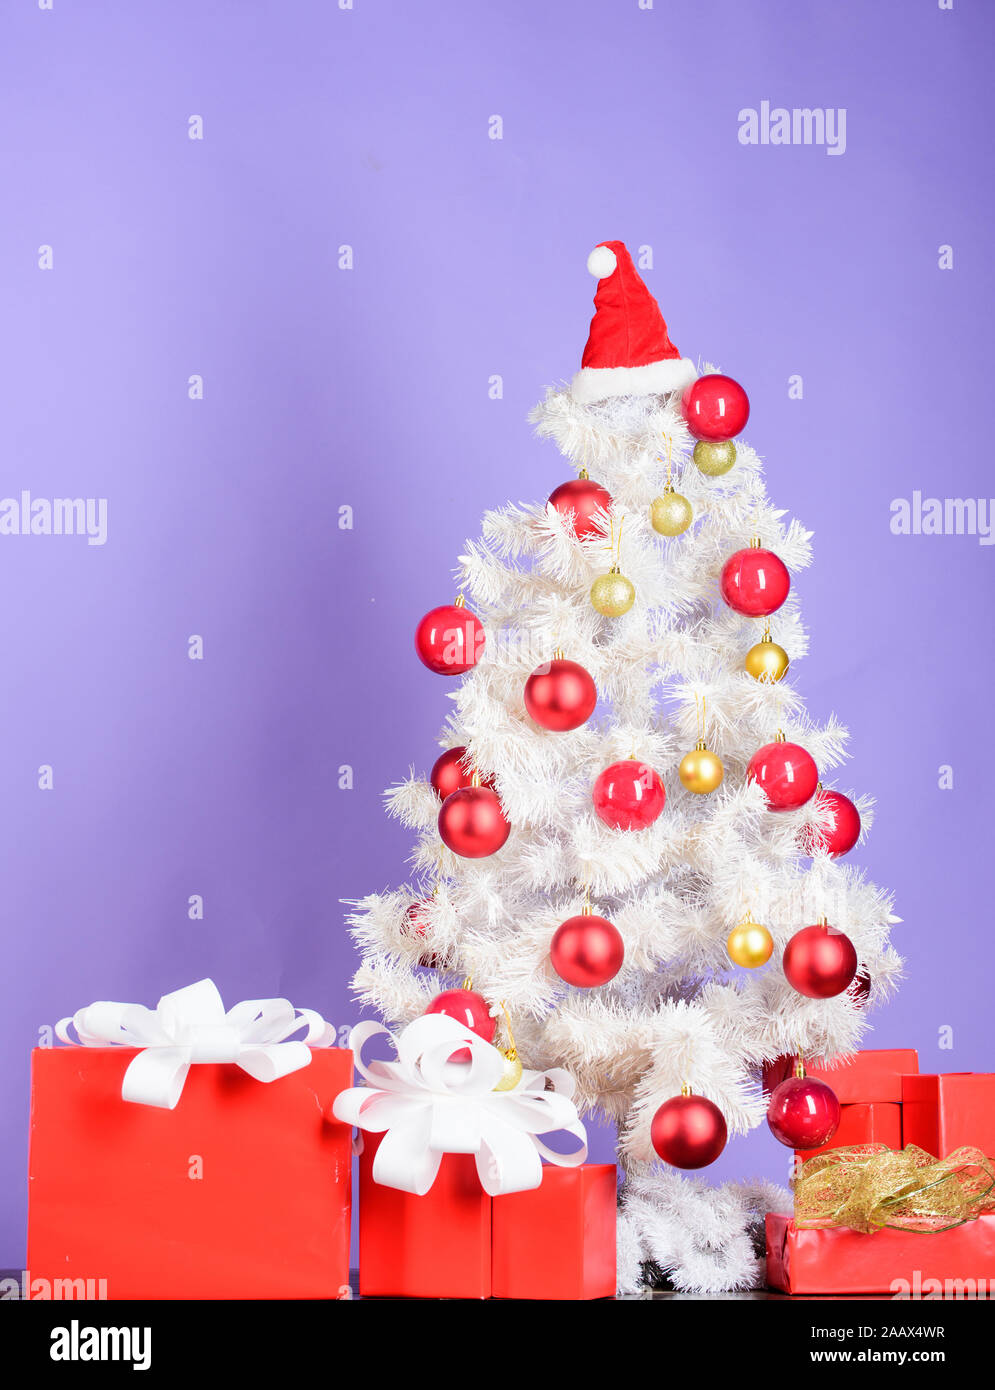 christmas eve sales 2020 Merry Christmas Decorated Christmas Tree Happy New 2020 Year Xmas Composition Present From Santa Under Tree Winter Holiday Celebration Xmas Shopping Sales Stock Photo Alamy christmas eve sales 2020